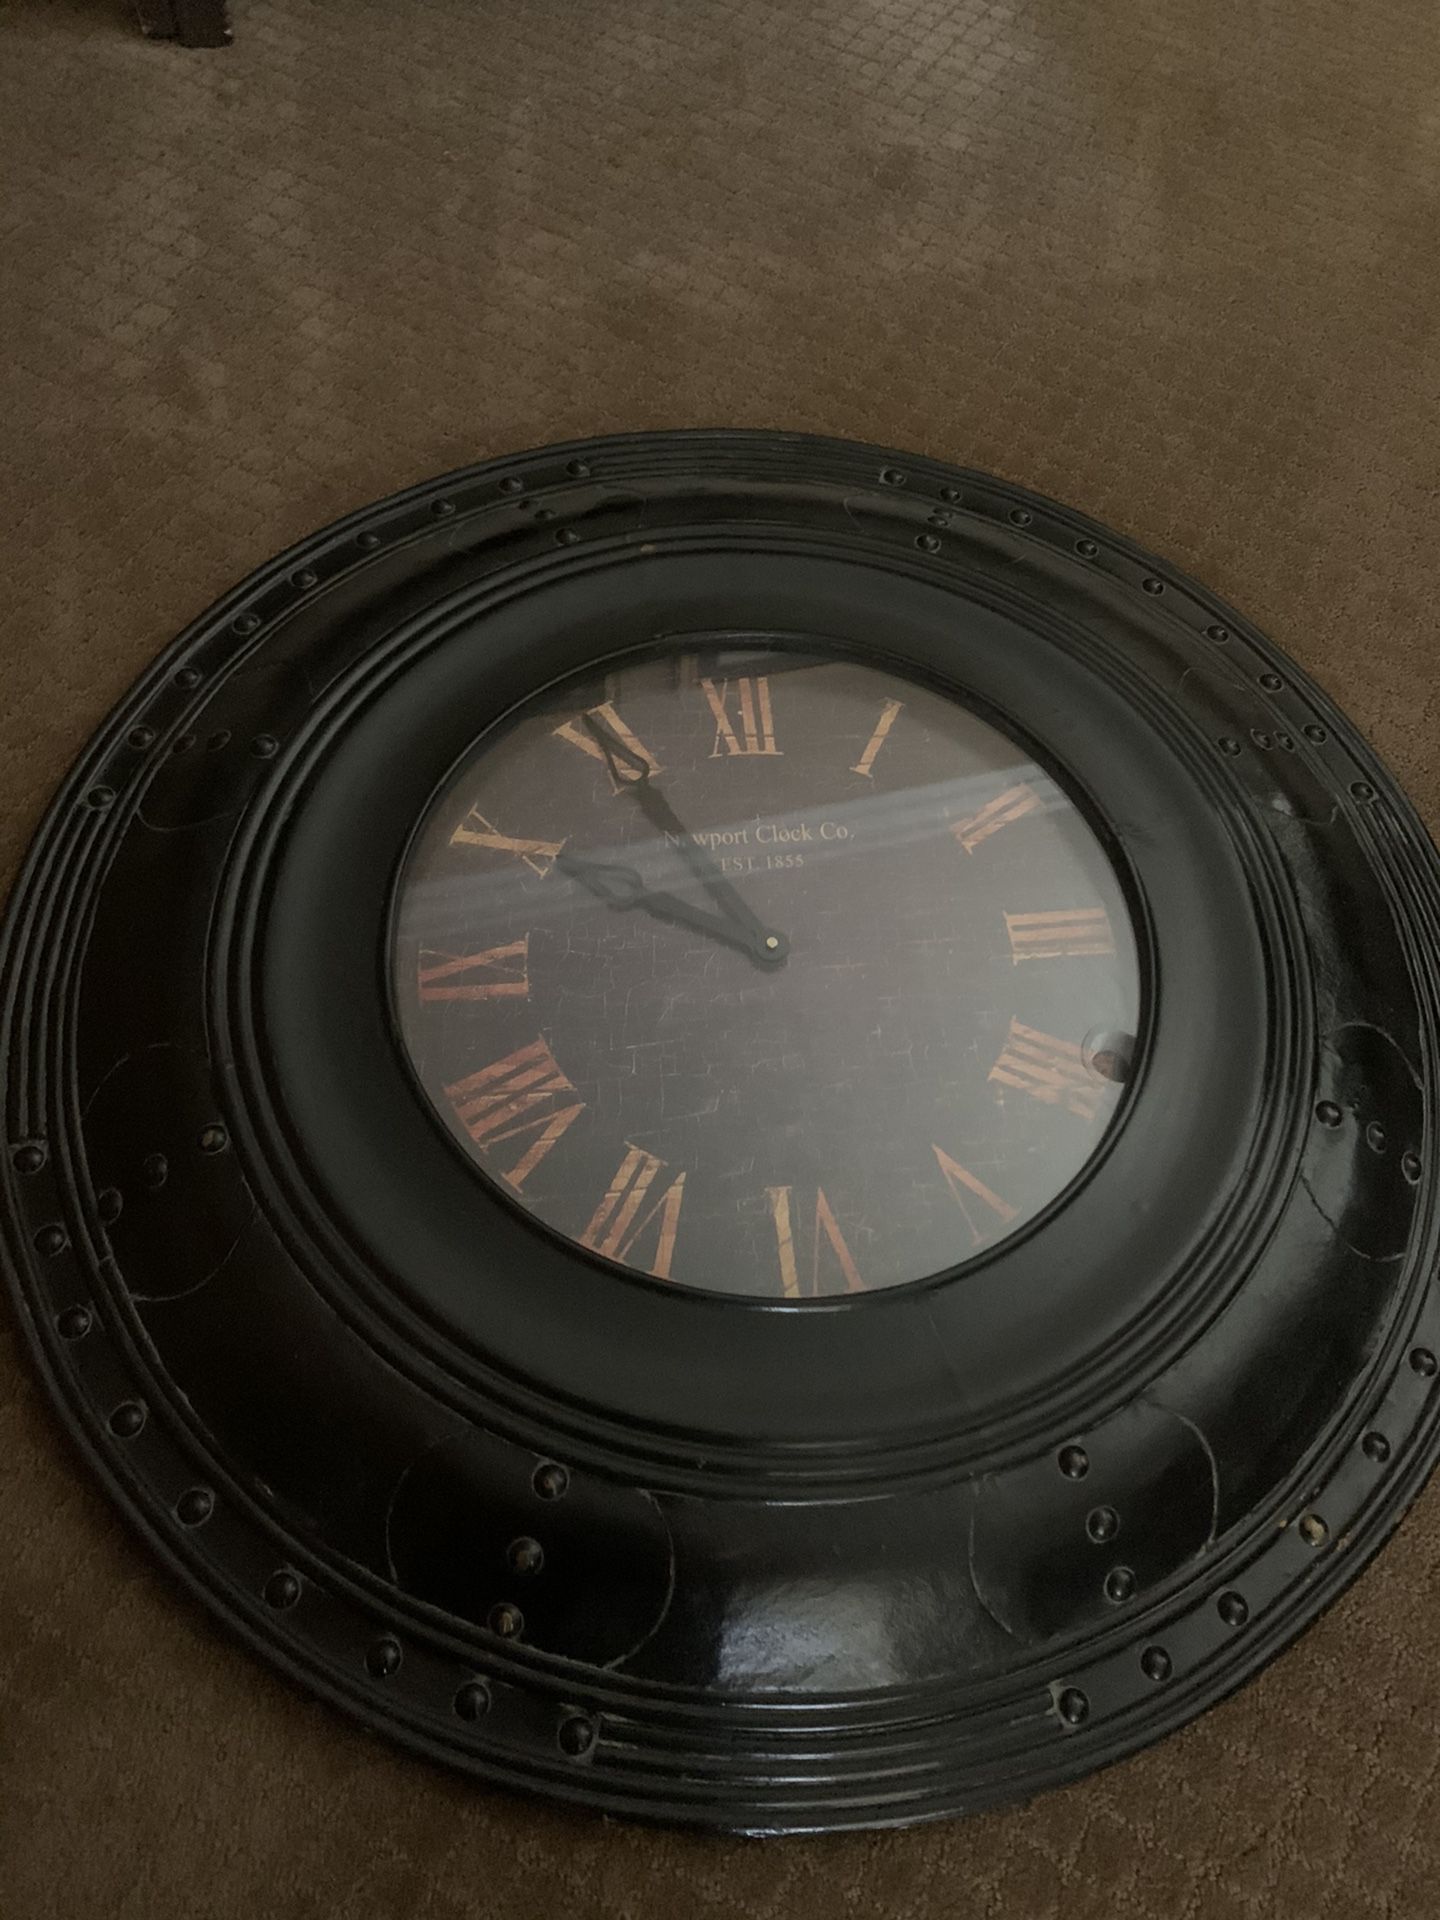 3x3 foot wall antique finish, battery operated clock.